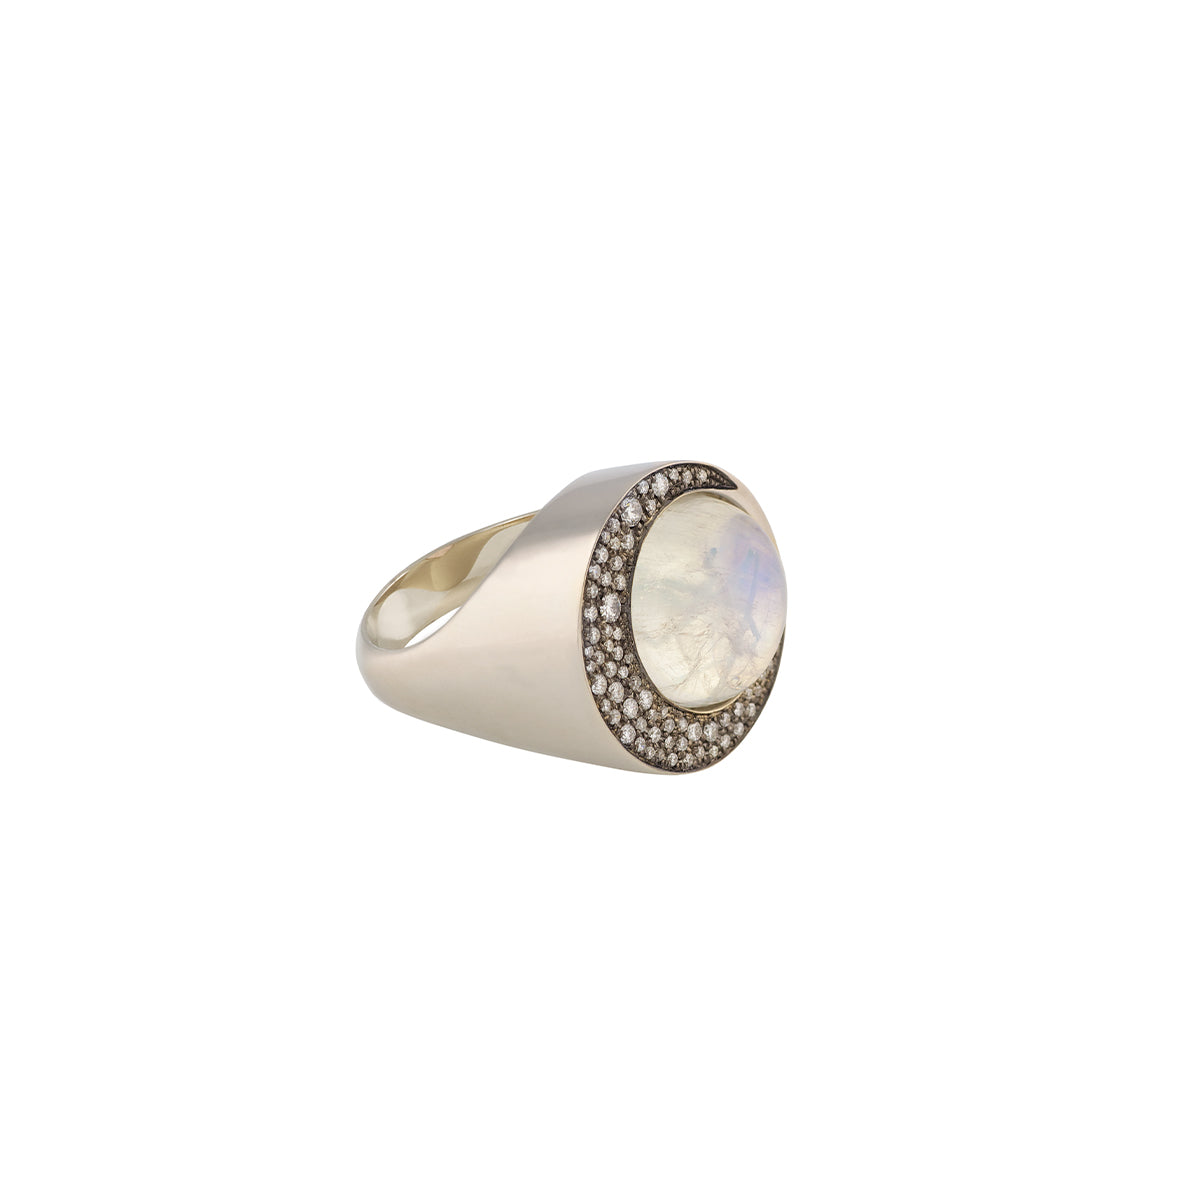 Moonstone Eclipse Ring